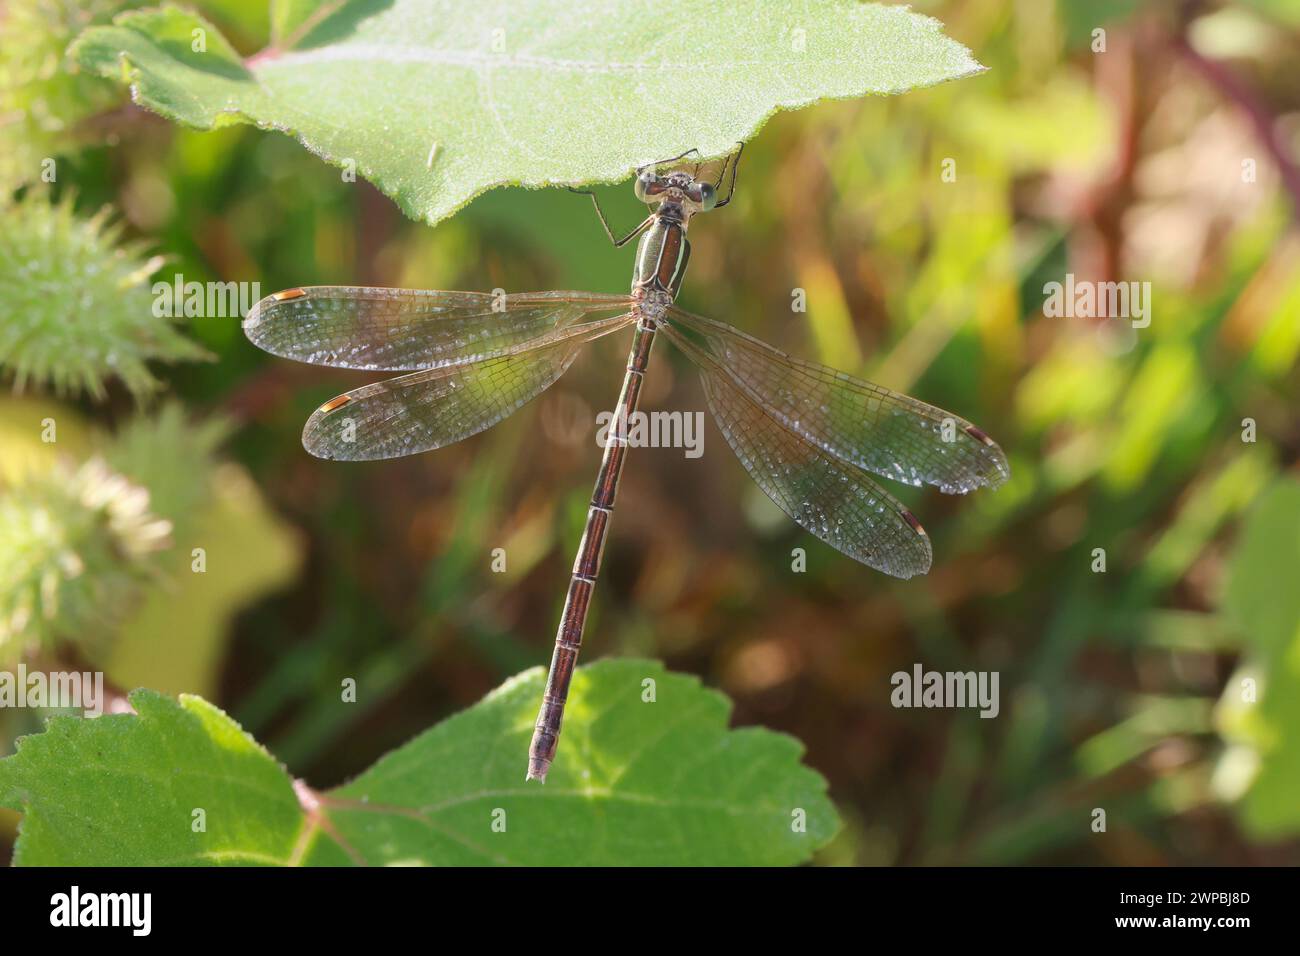 Migrant spreadwing, Southern emerald damselfly (Lestes barbarus), female at a leaf, dorsal view, Germany Stock Photo